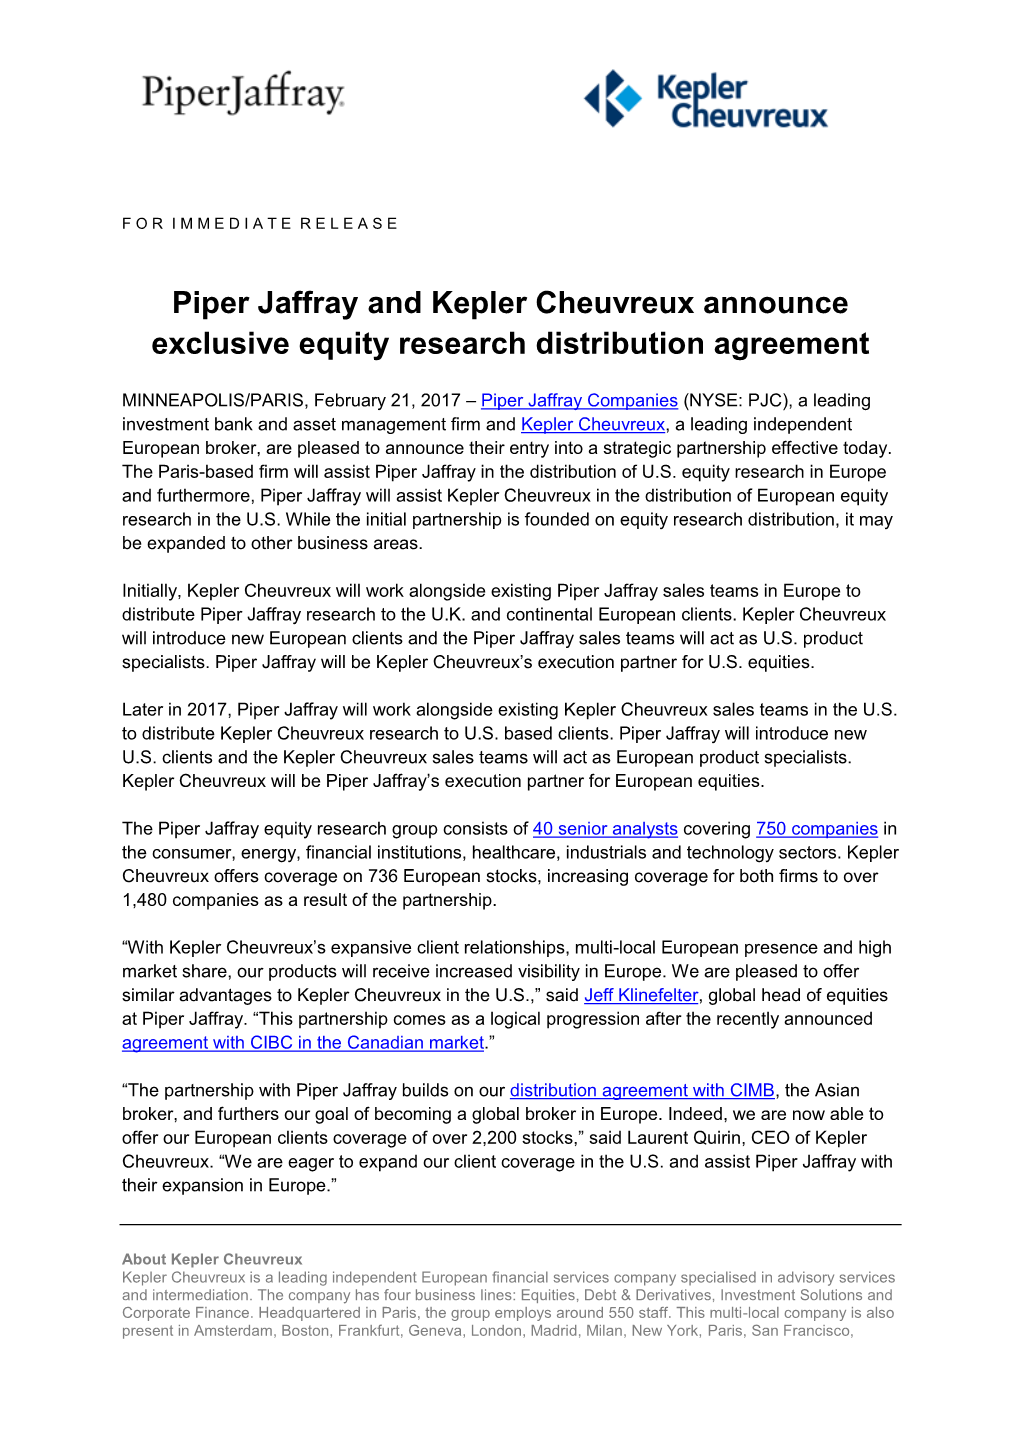 Piper Jaffray and Kepler Cheuvreux Announce Exclusive Equity Research Distribution Agreement